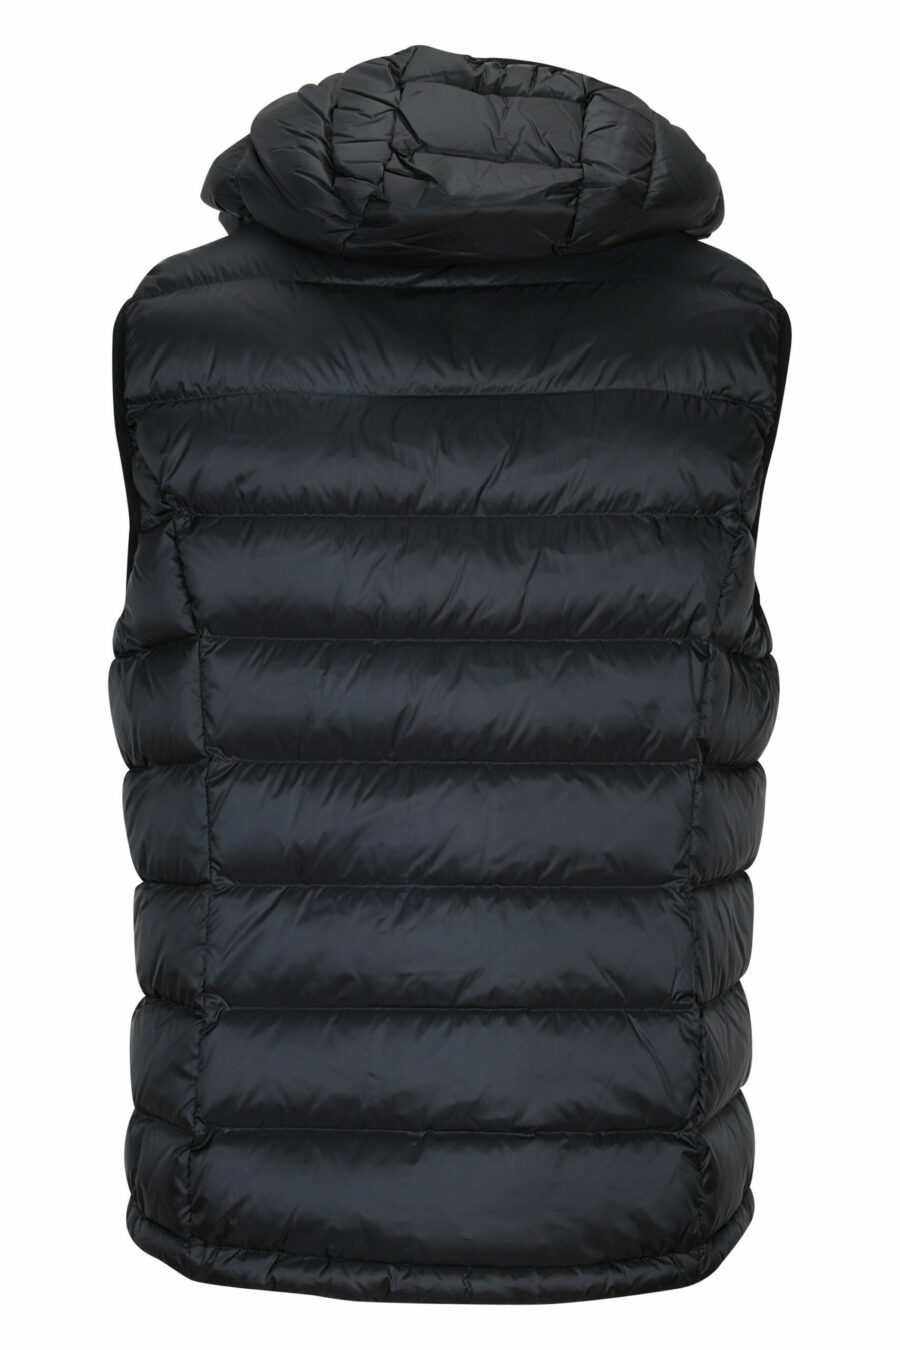 Black hooded waistcoat with straight lines and beige interior - 8058610667900 3 scaled